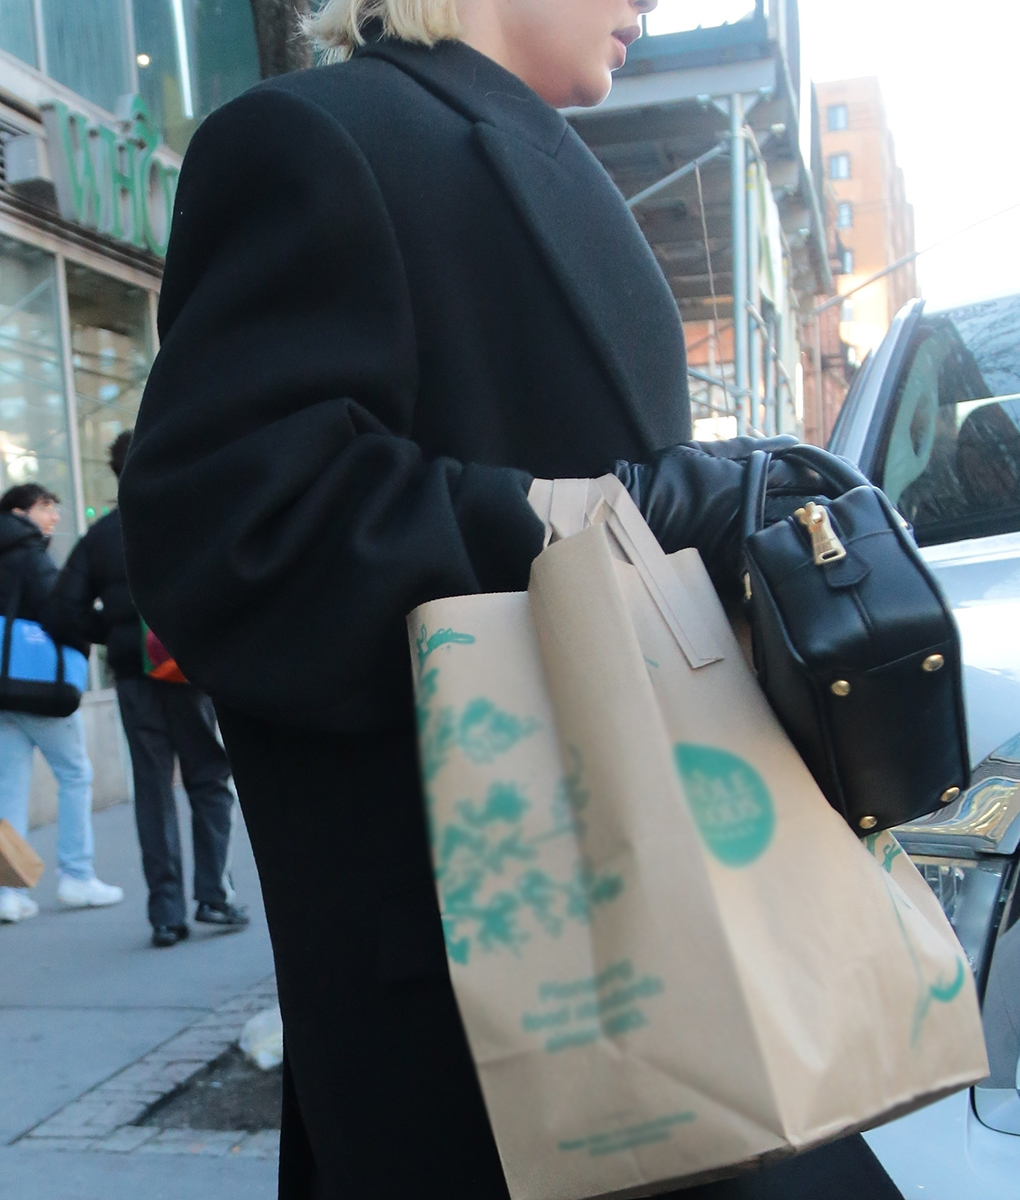 Gigi Hadid spotted shopping at Whole Foods in SoHo, NYC